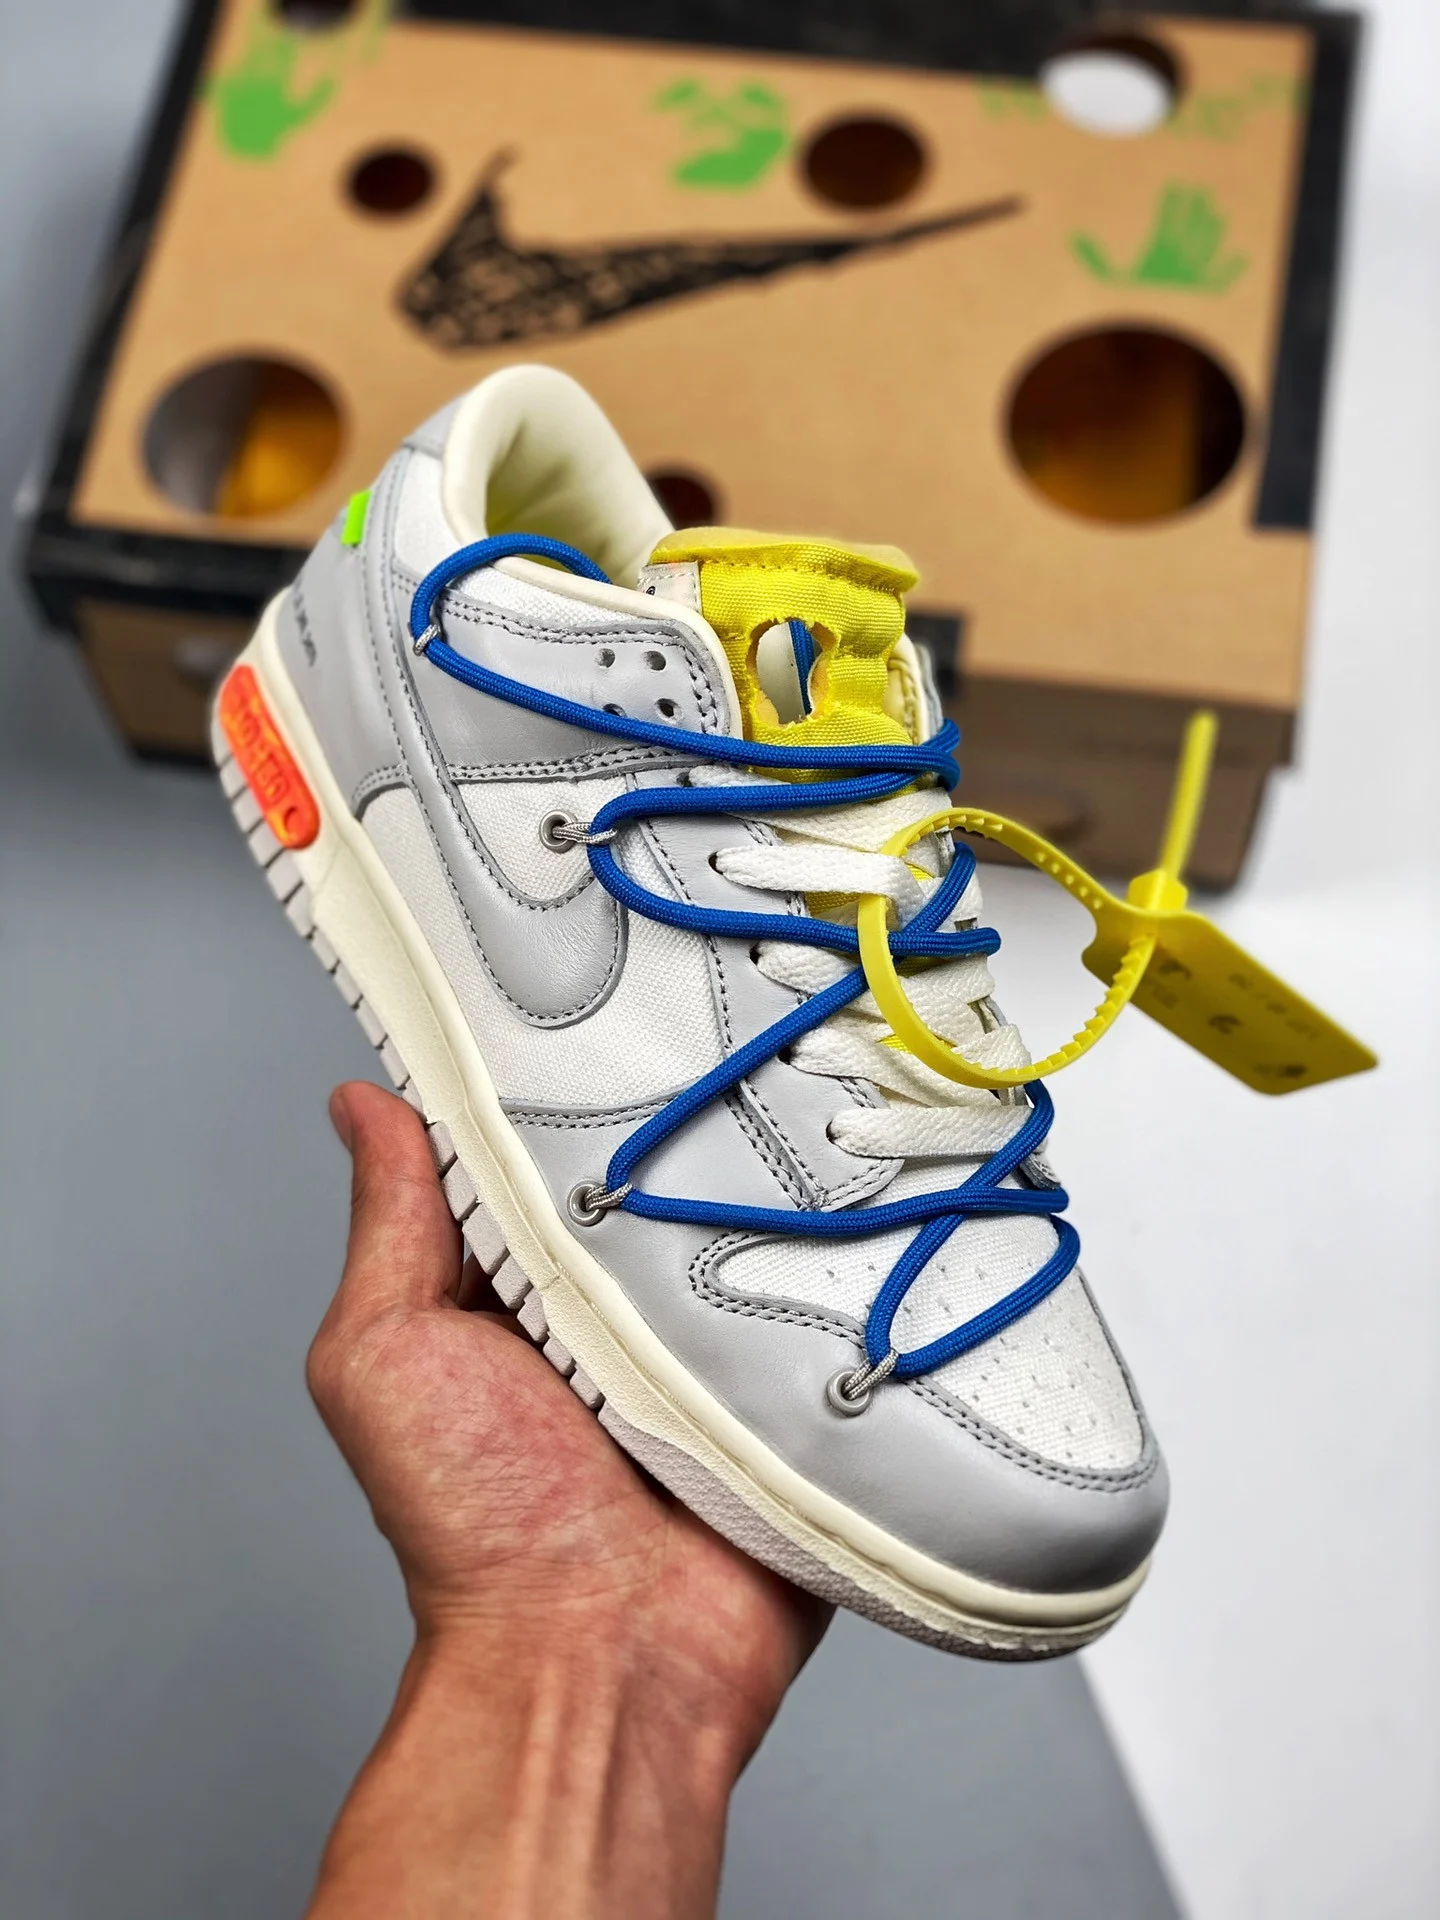 Off-White x Nike Dunk Low 10 of 50 Sail Grey Yellow For Sale